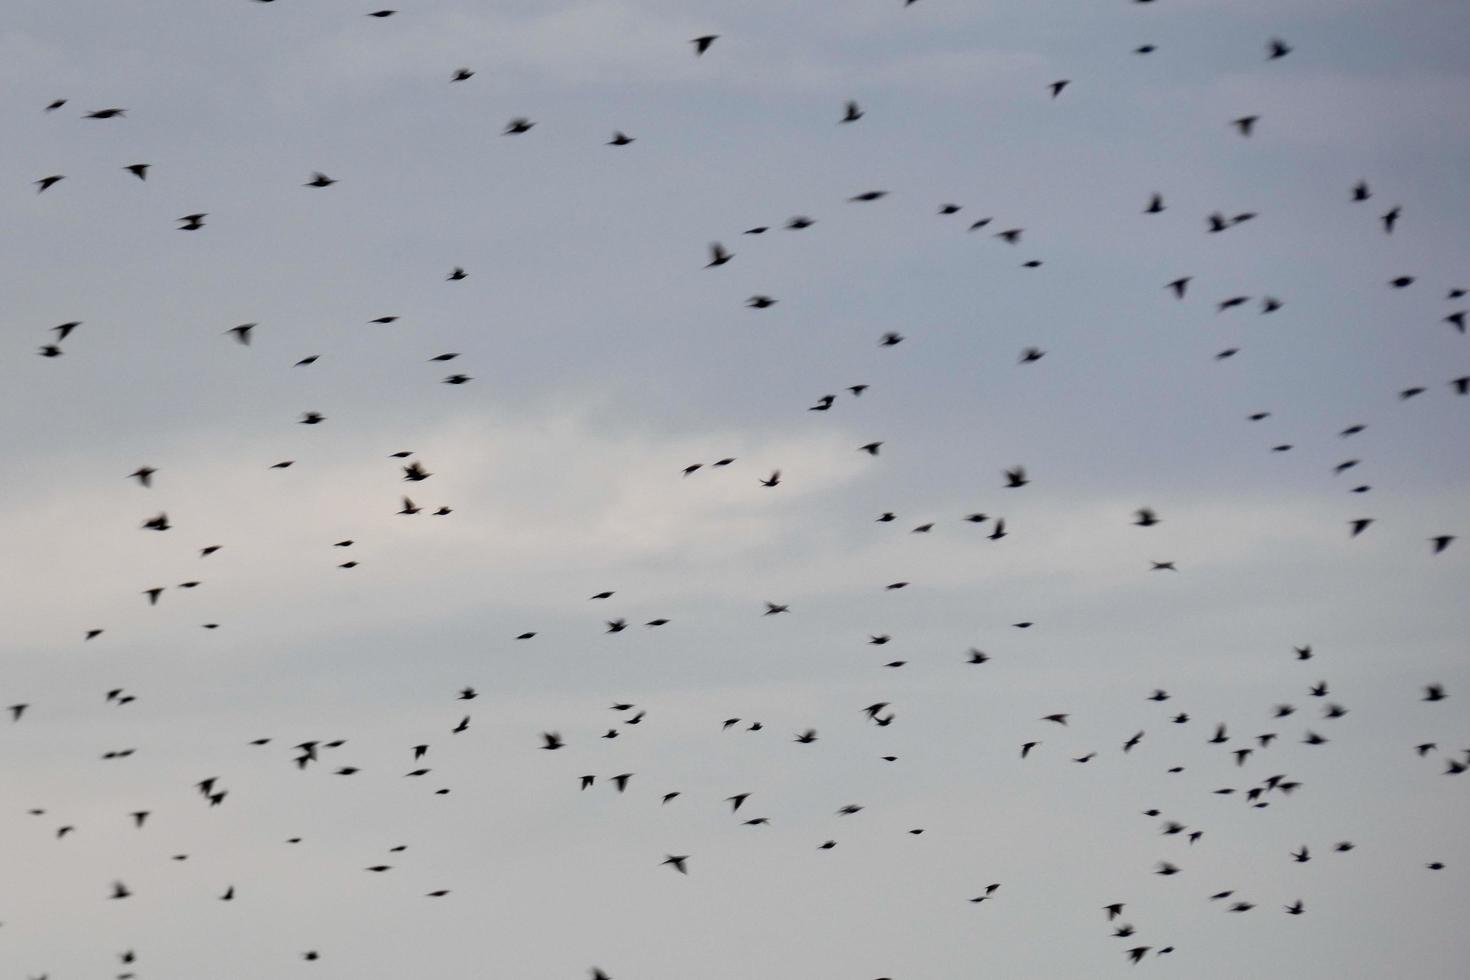 hundreds of birds flying aimlessly in the autumn photo